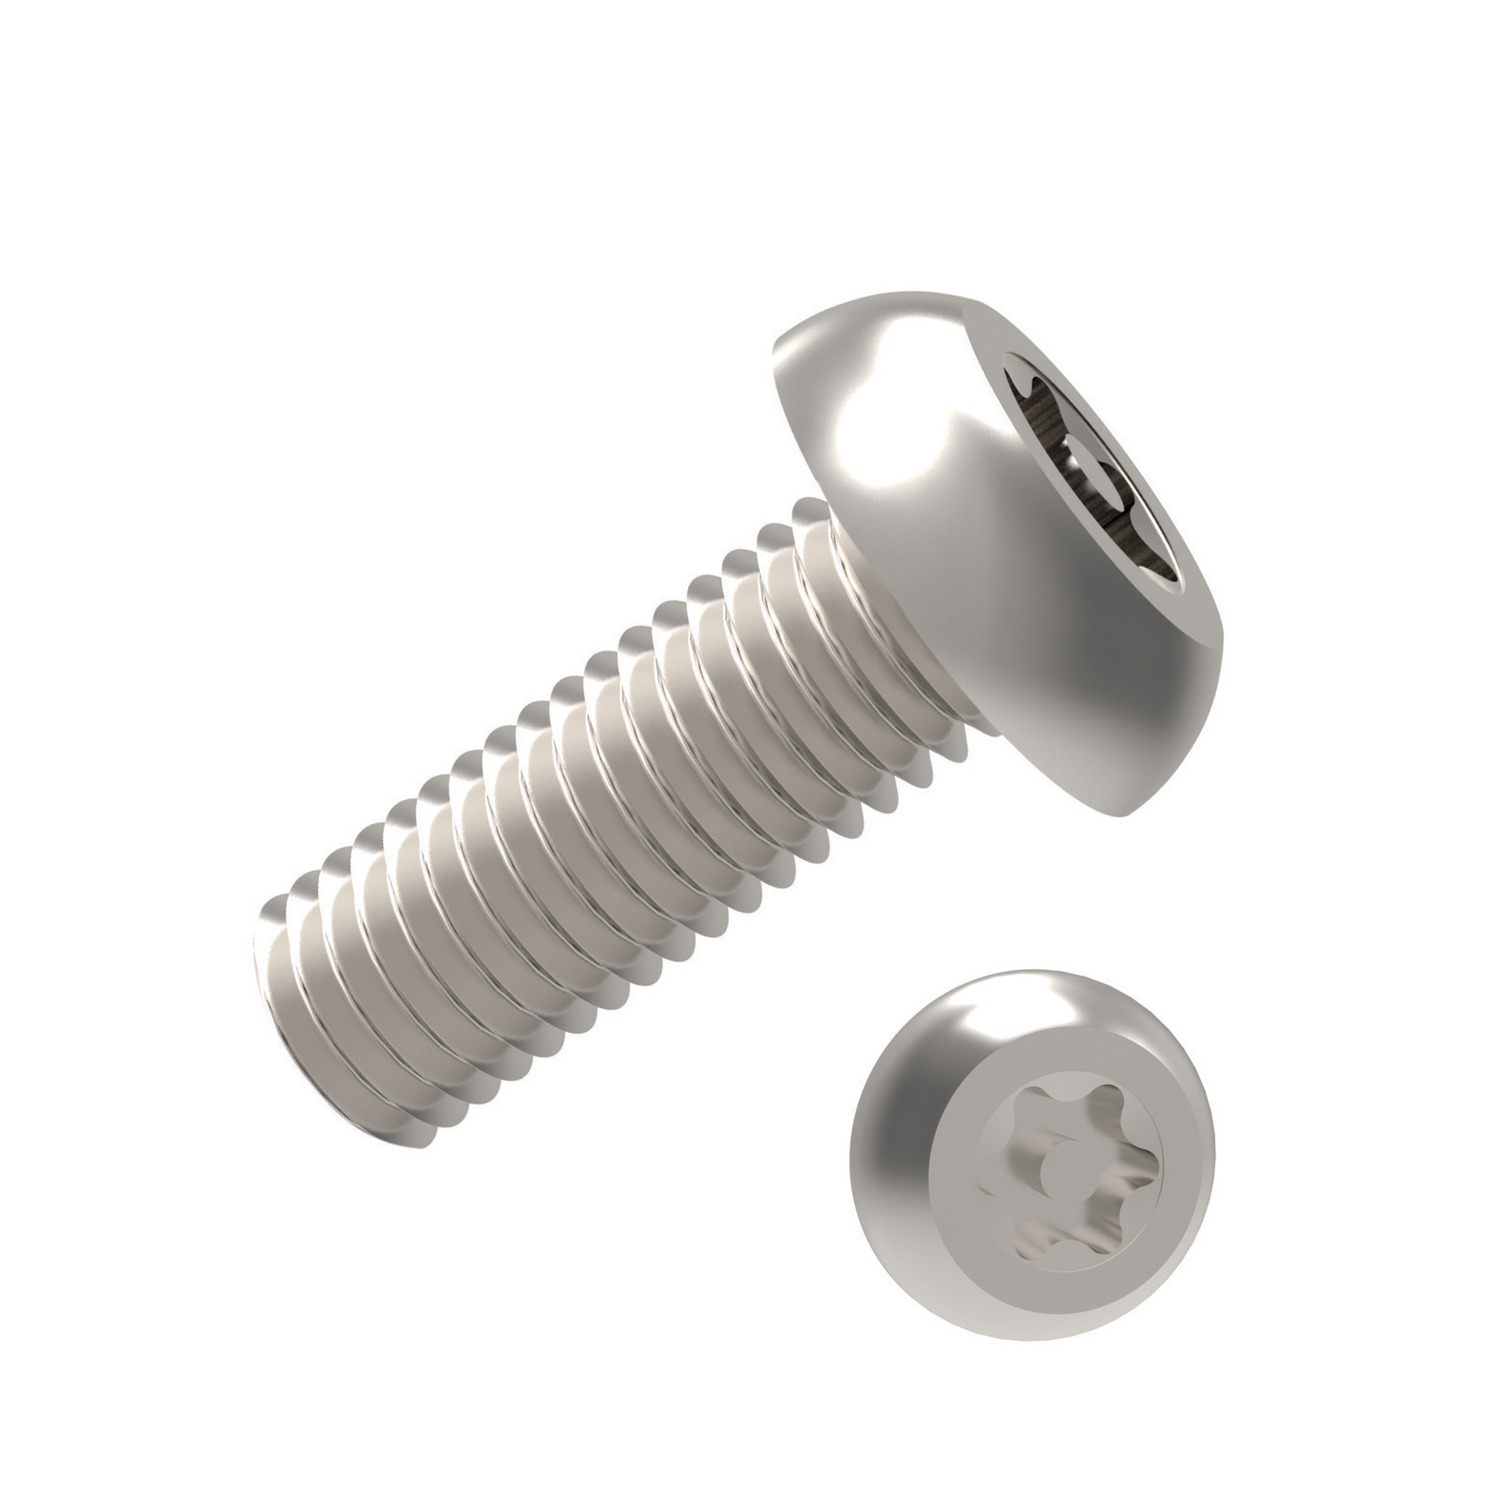 Pin TX Security Screws These are security screw. The TX head has a special pin, preventing tampering with the screw.